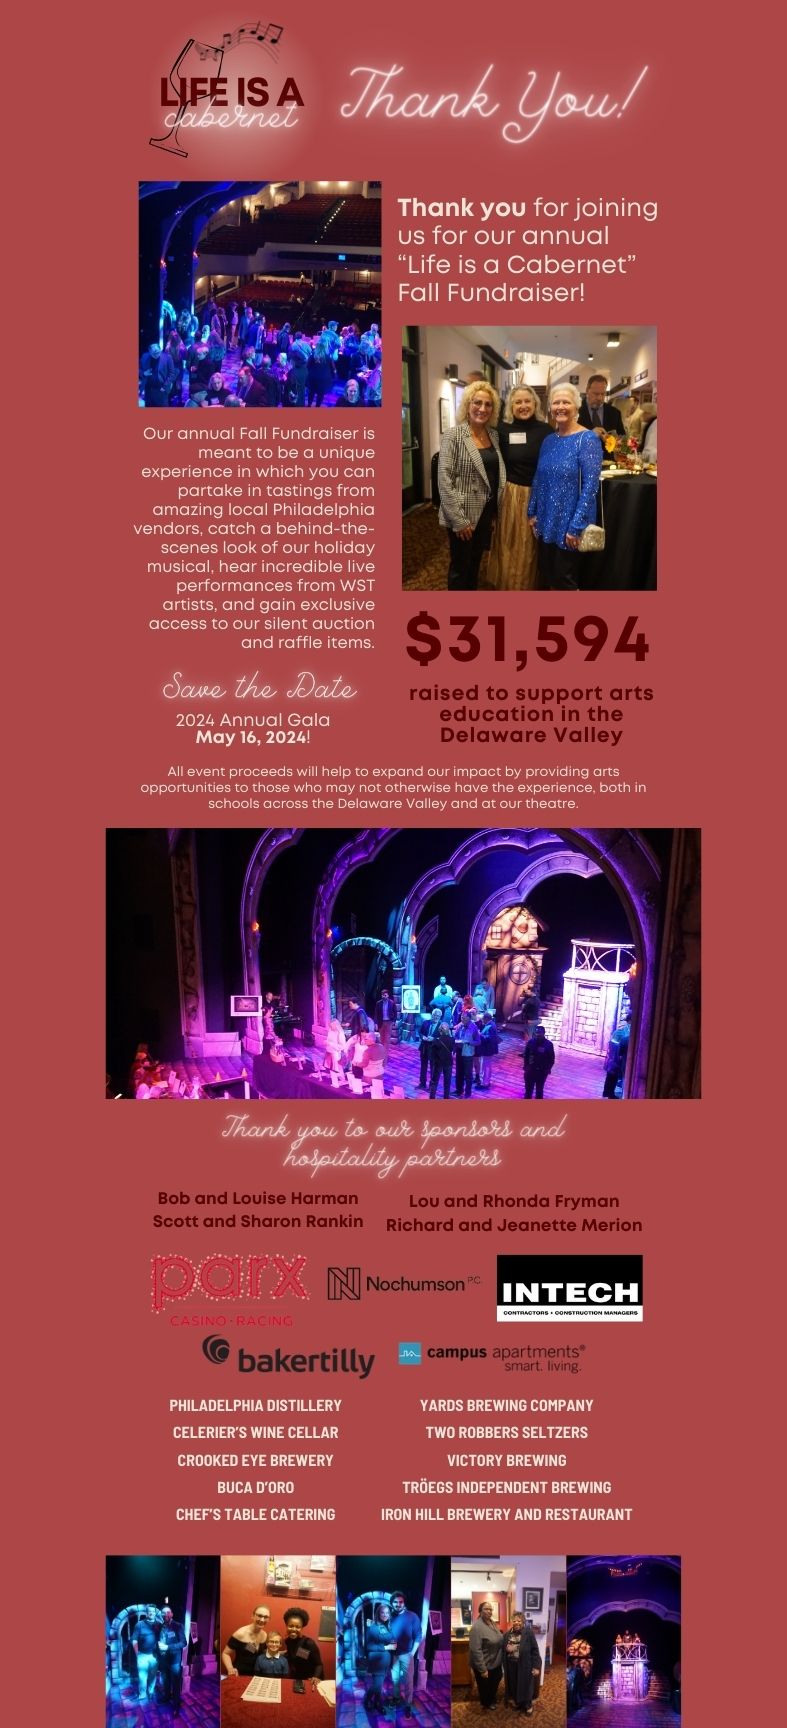 $31,594 raised to support arts education! Save the date: 2024 Annual Gala, May 16